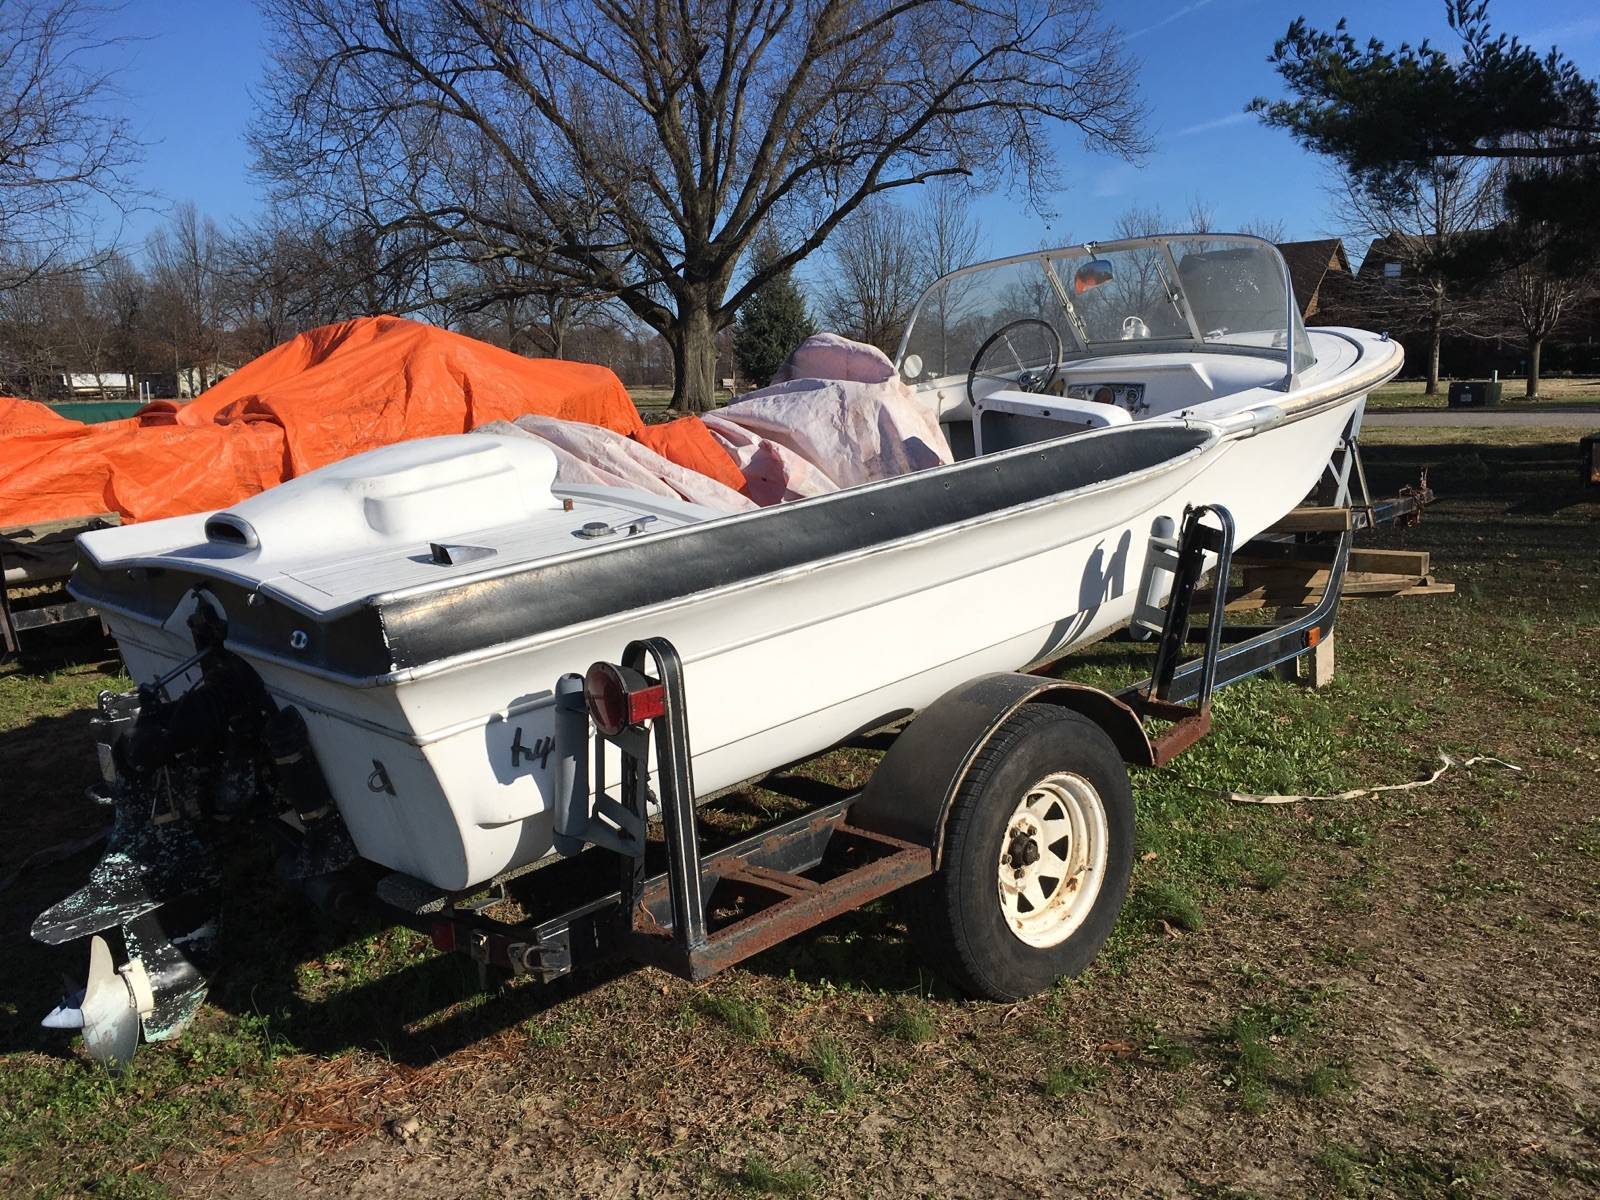 Hydrodyne Utility 1962 for sale for $600 - Boats-from-USA.com